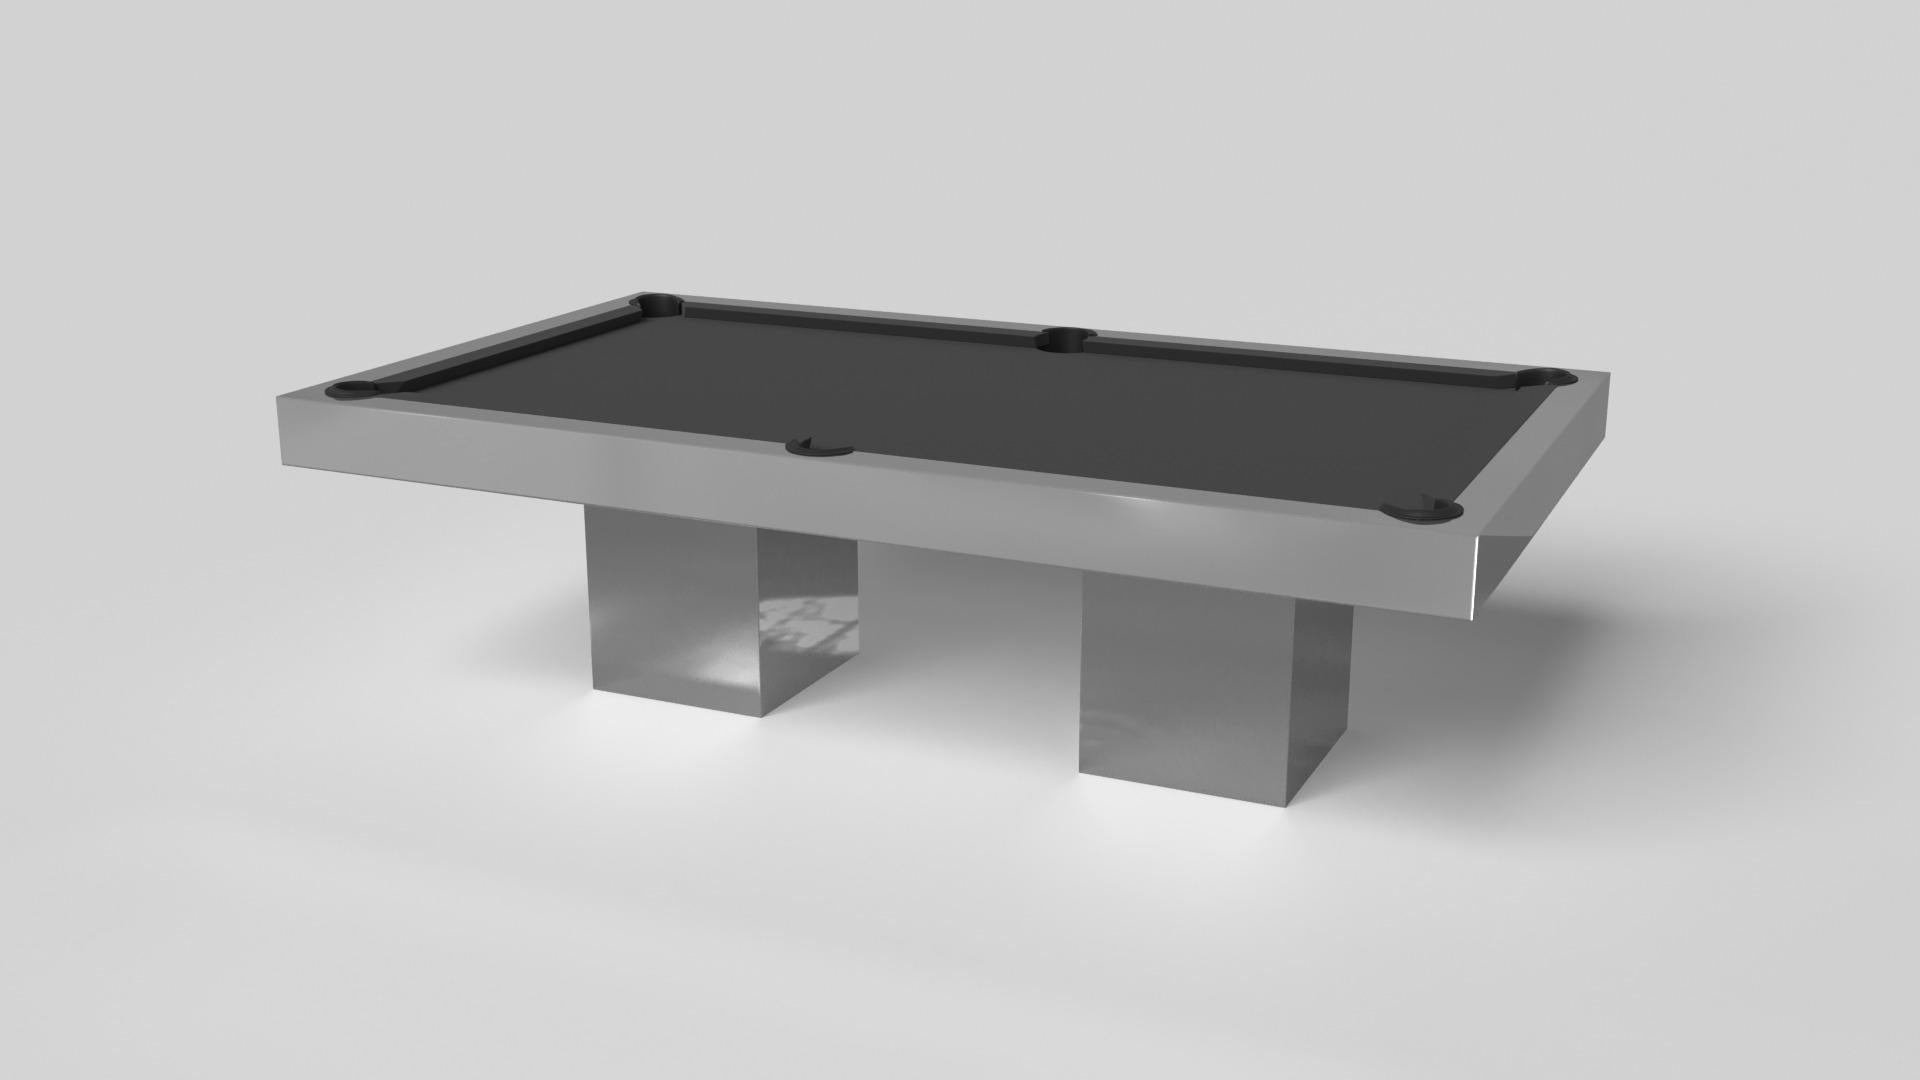 Minimalist design meets opulent elegance in the Trestle pool table. Detailed with a professional surface for endless game play, this contemporary table is expertly crafted. Square block legs give it a stark, geometric look that contributes to its